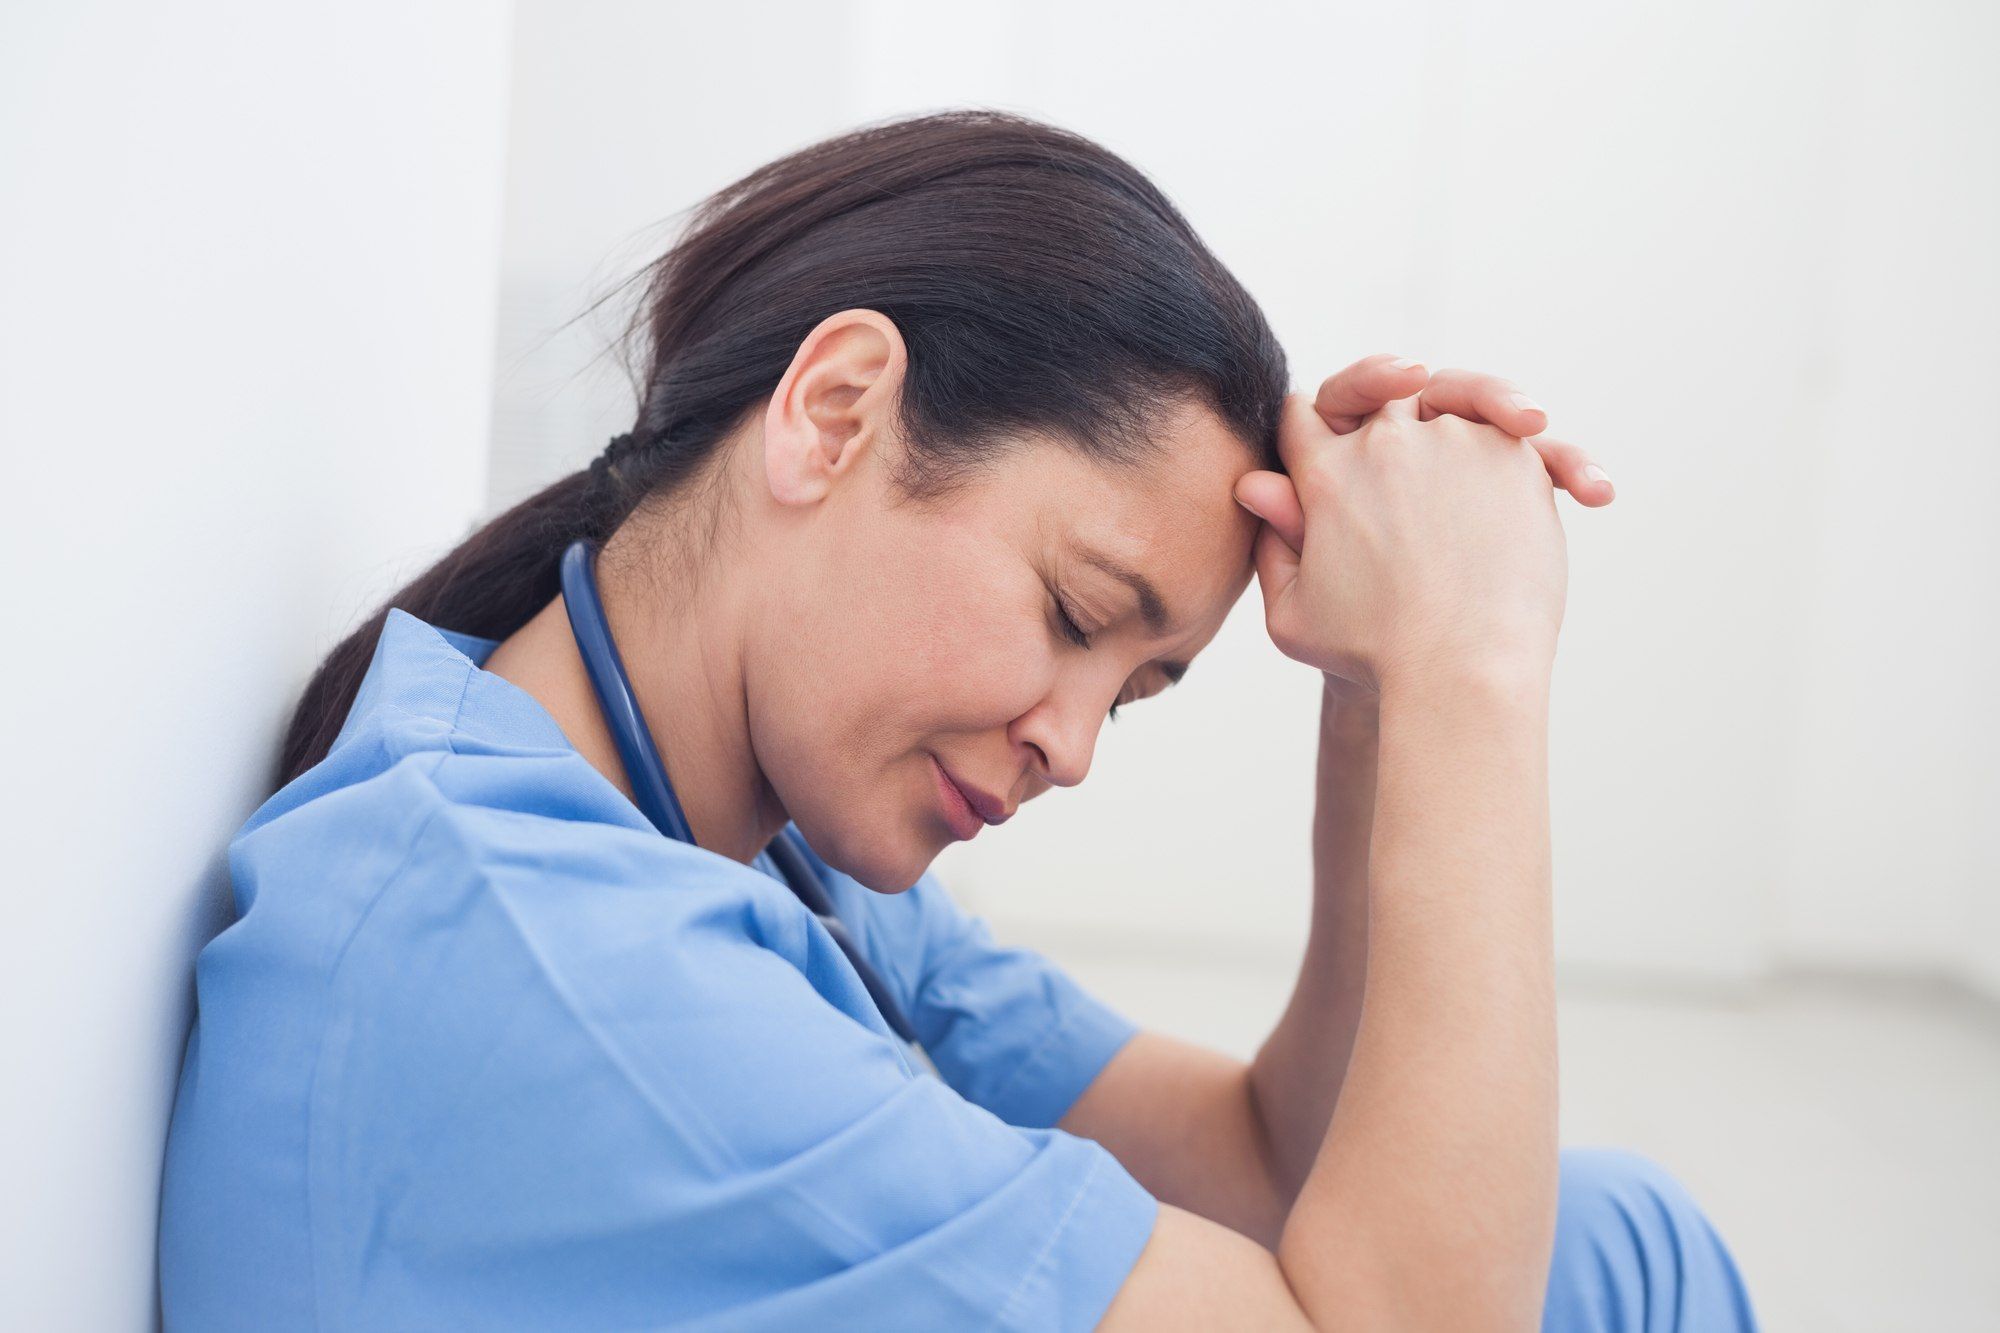 Do you need to file a travel nurse lawsuit?